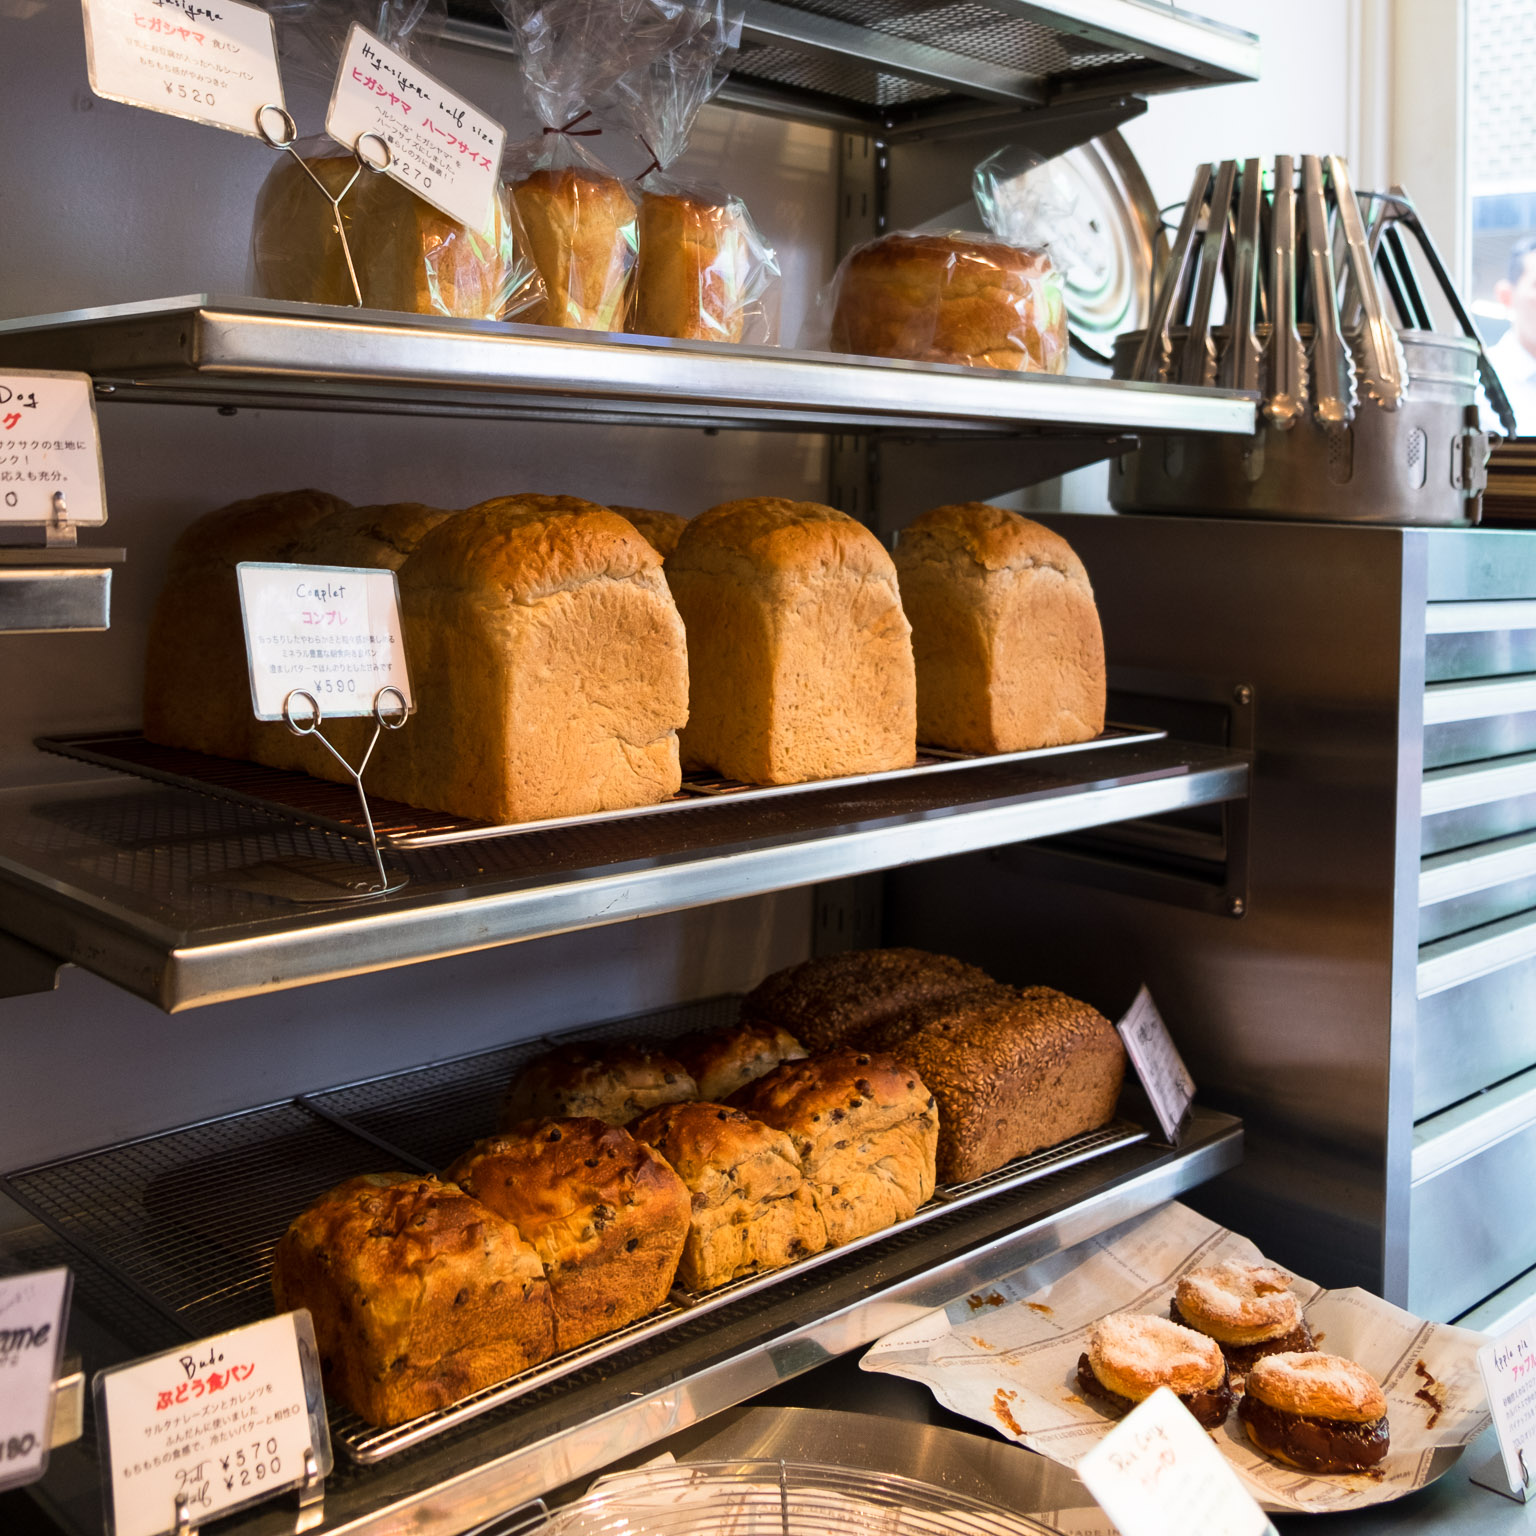 Trendy little bread shop fashioned by a proudly obsessive chef